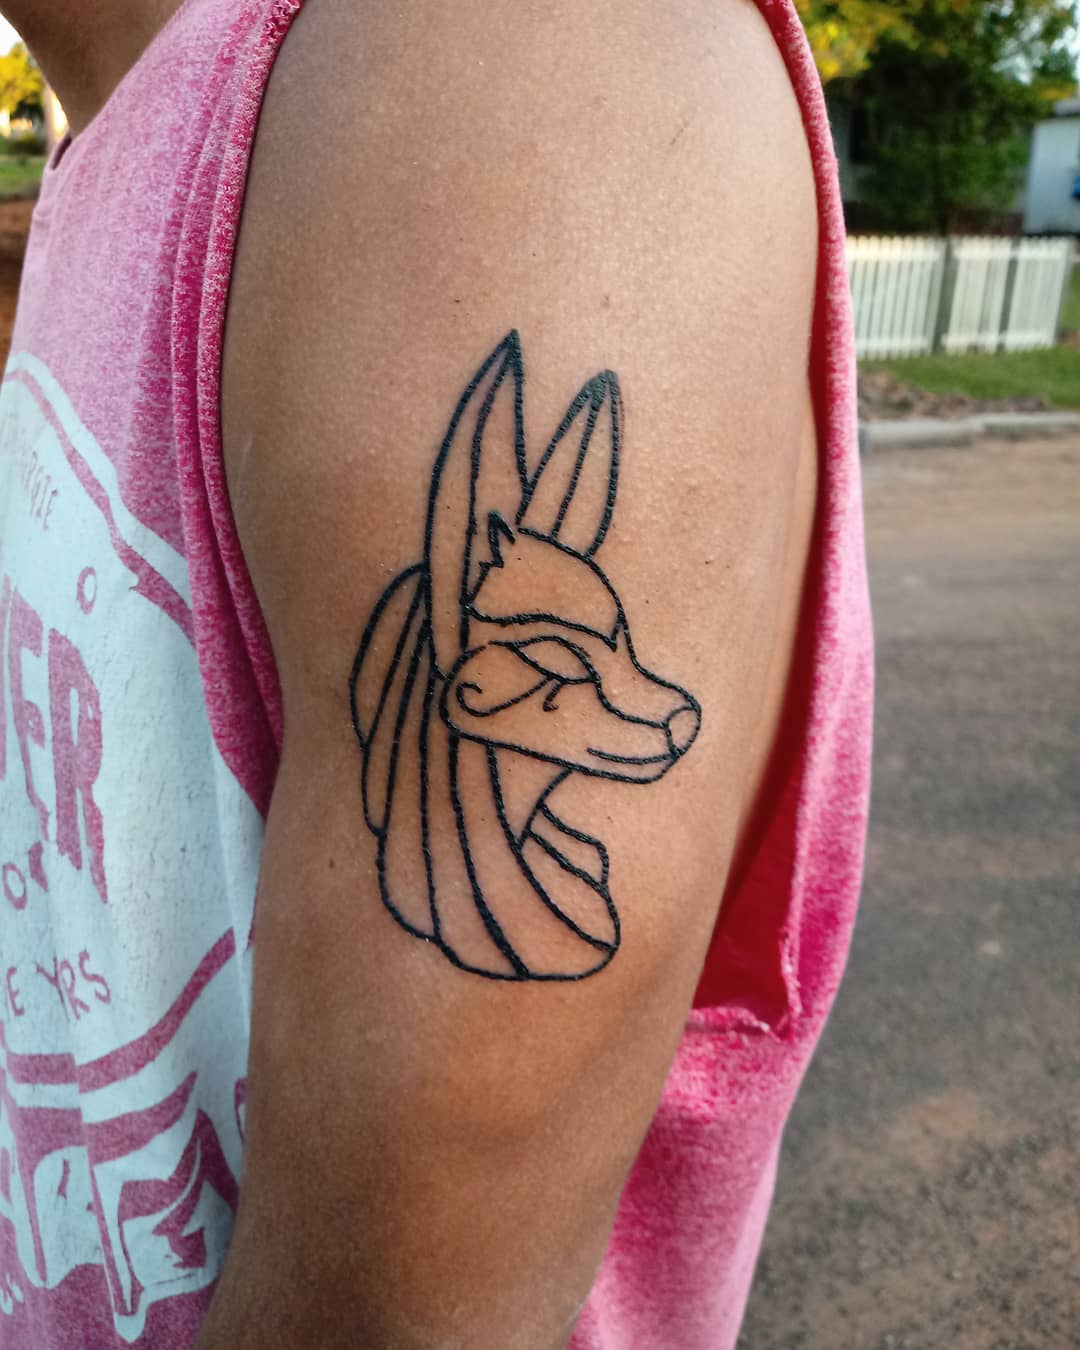 You can do line work for your Anubis piece.